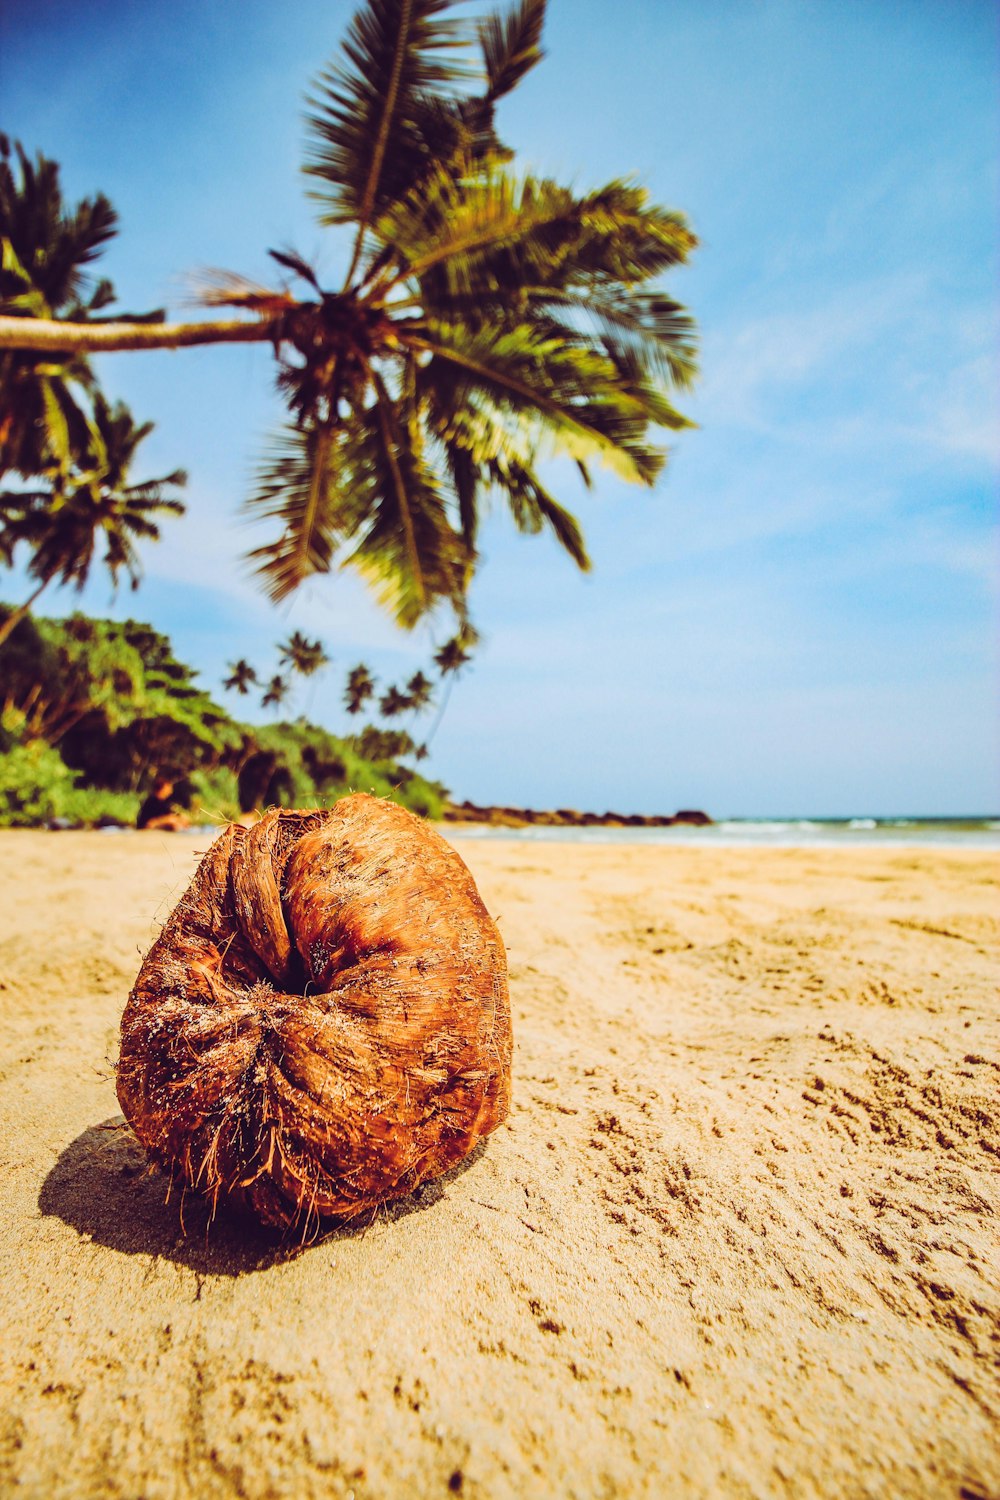 coconut fruit on beach shore during daytime